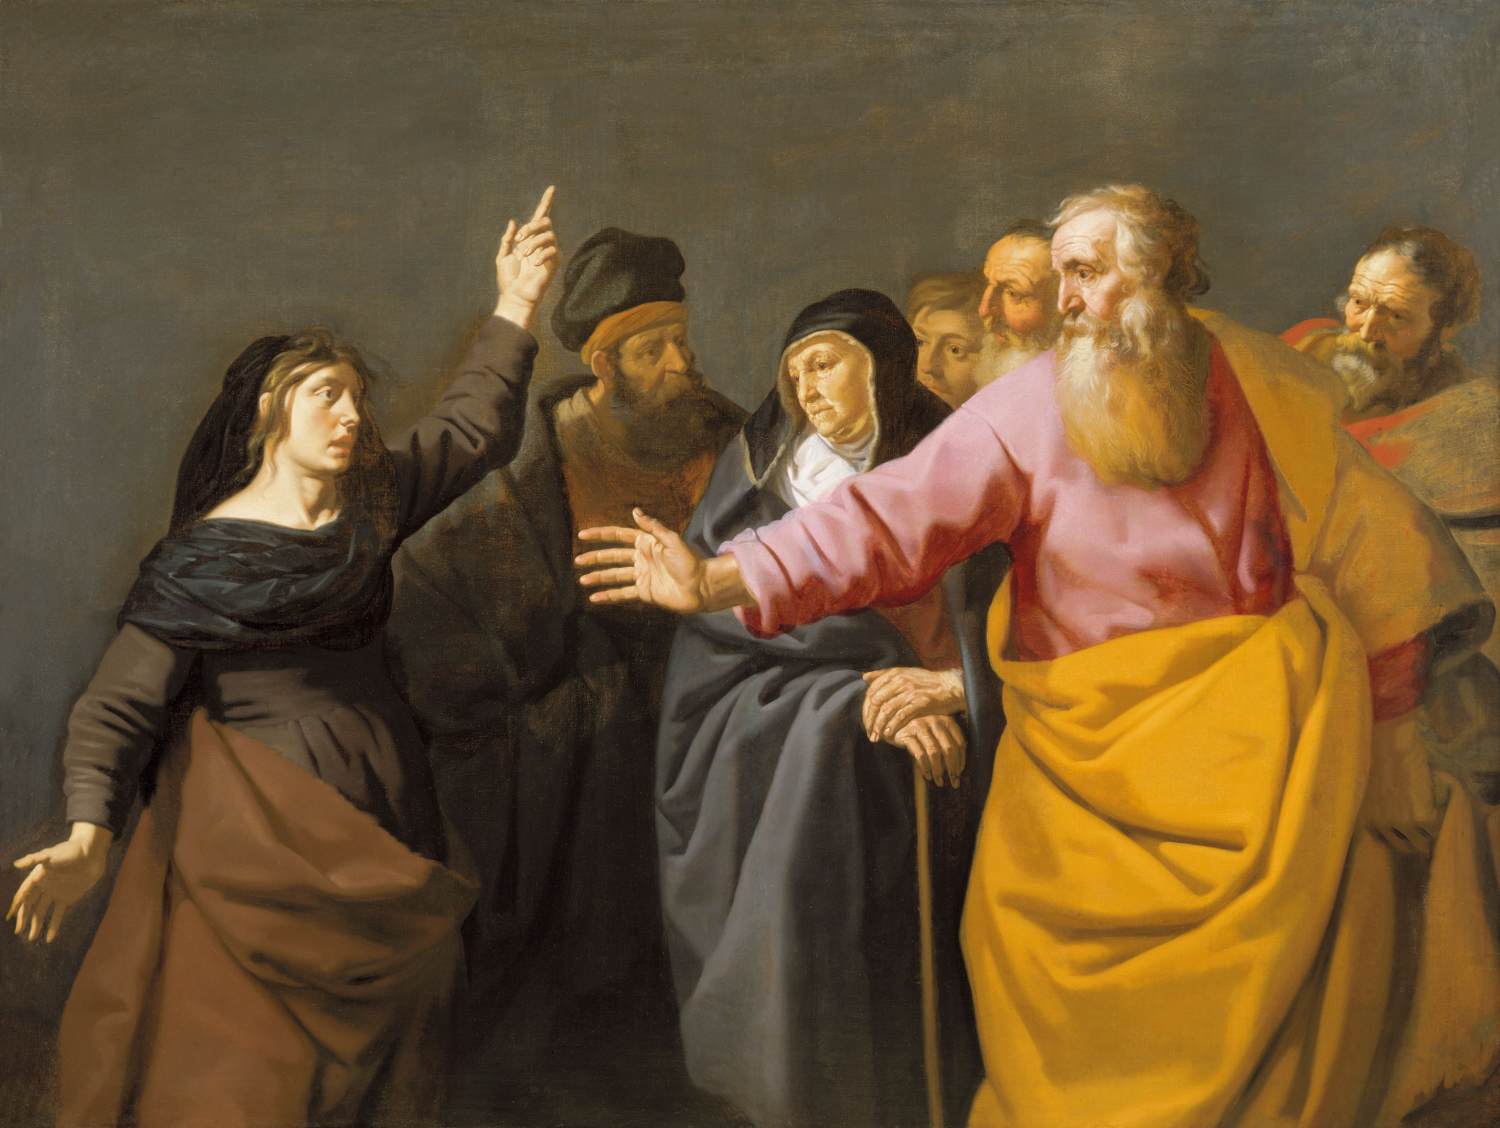 Saint Paul and the Diviner of Philippi